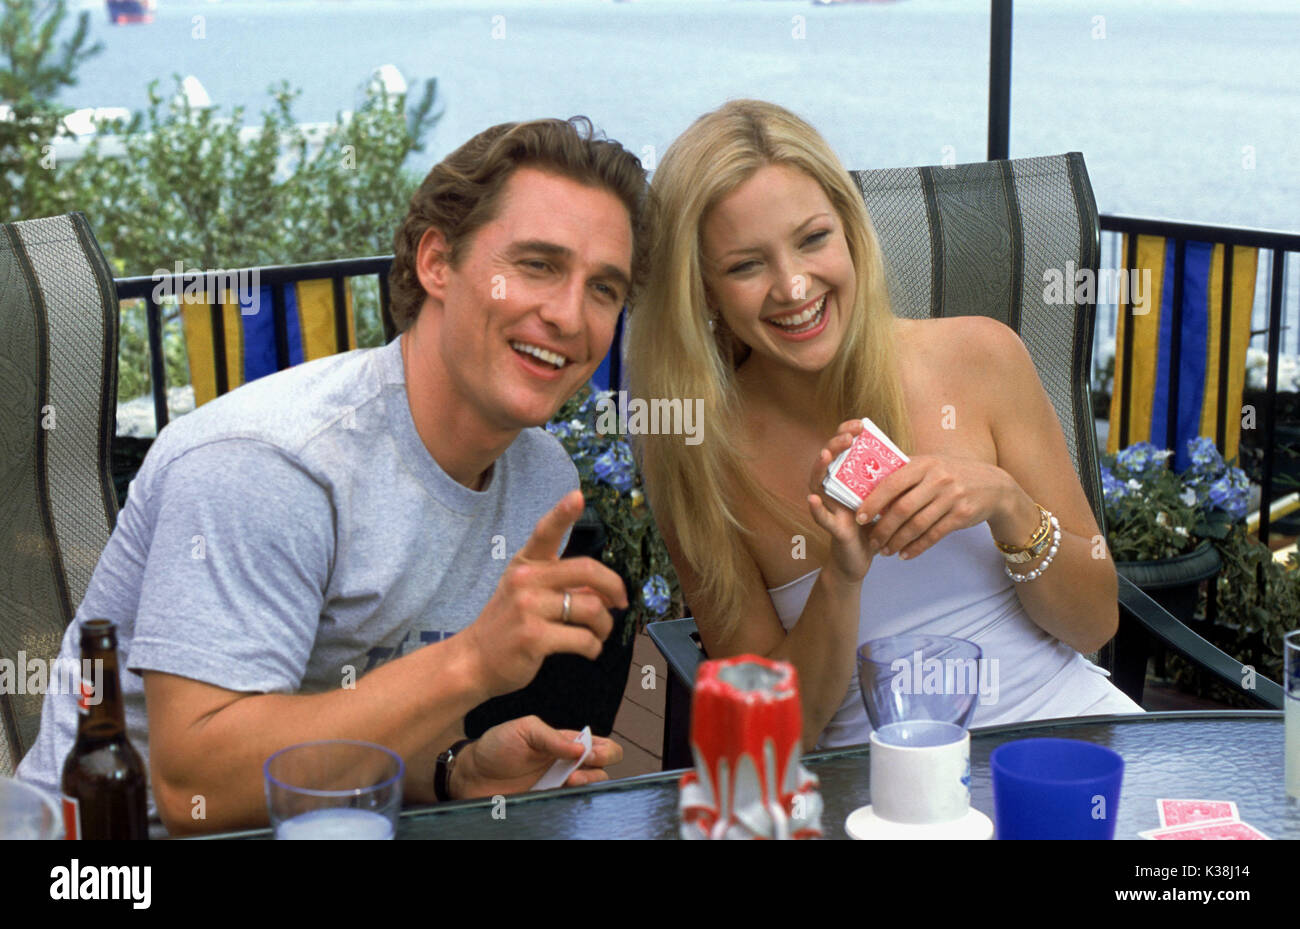 HOW TO LOSE A GUY IN 10 DAYS MATTHEW MCCONAUGHEY AND KATE HUDSON     Date: 2003 Stock Photo